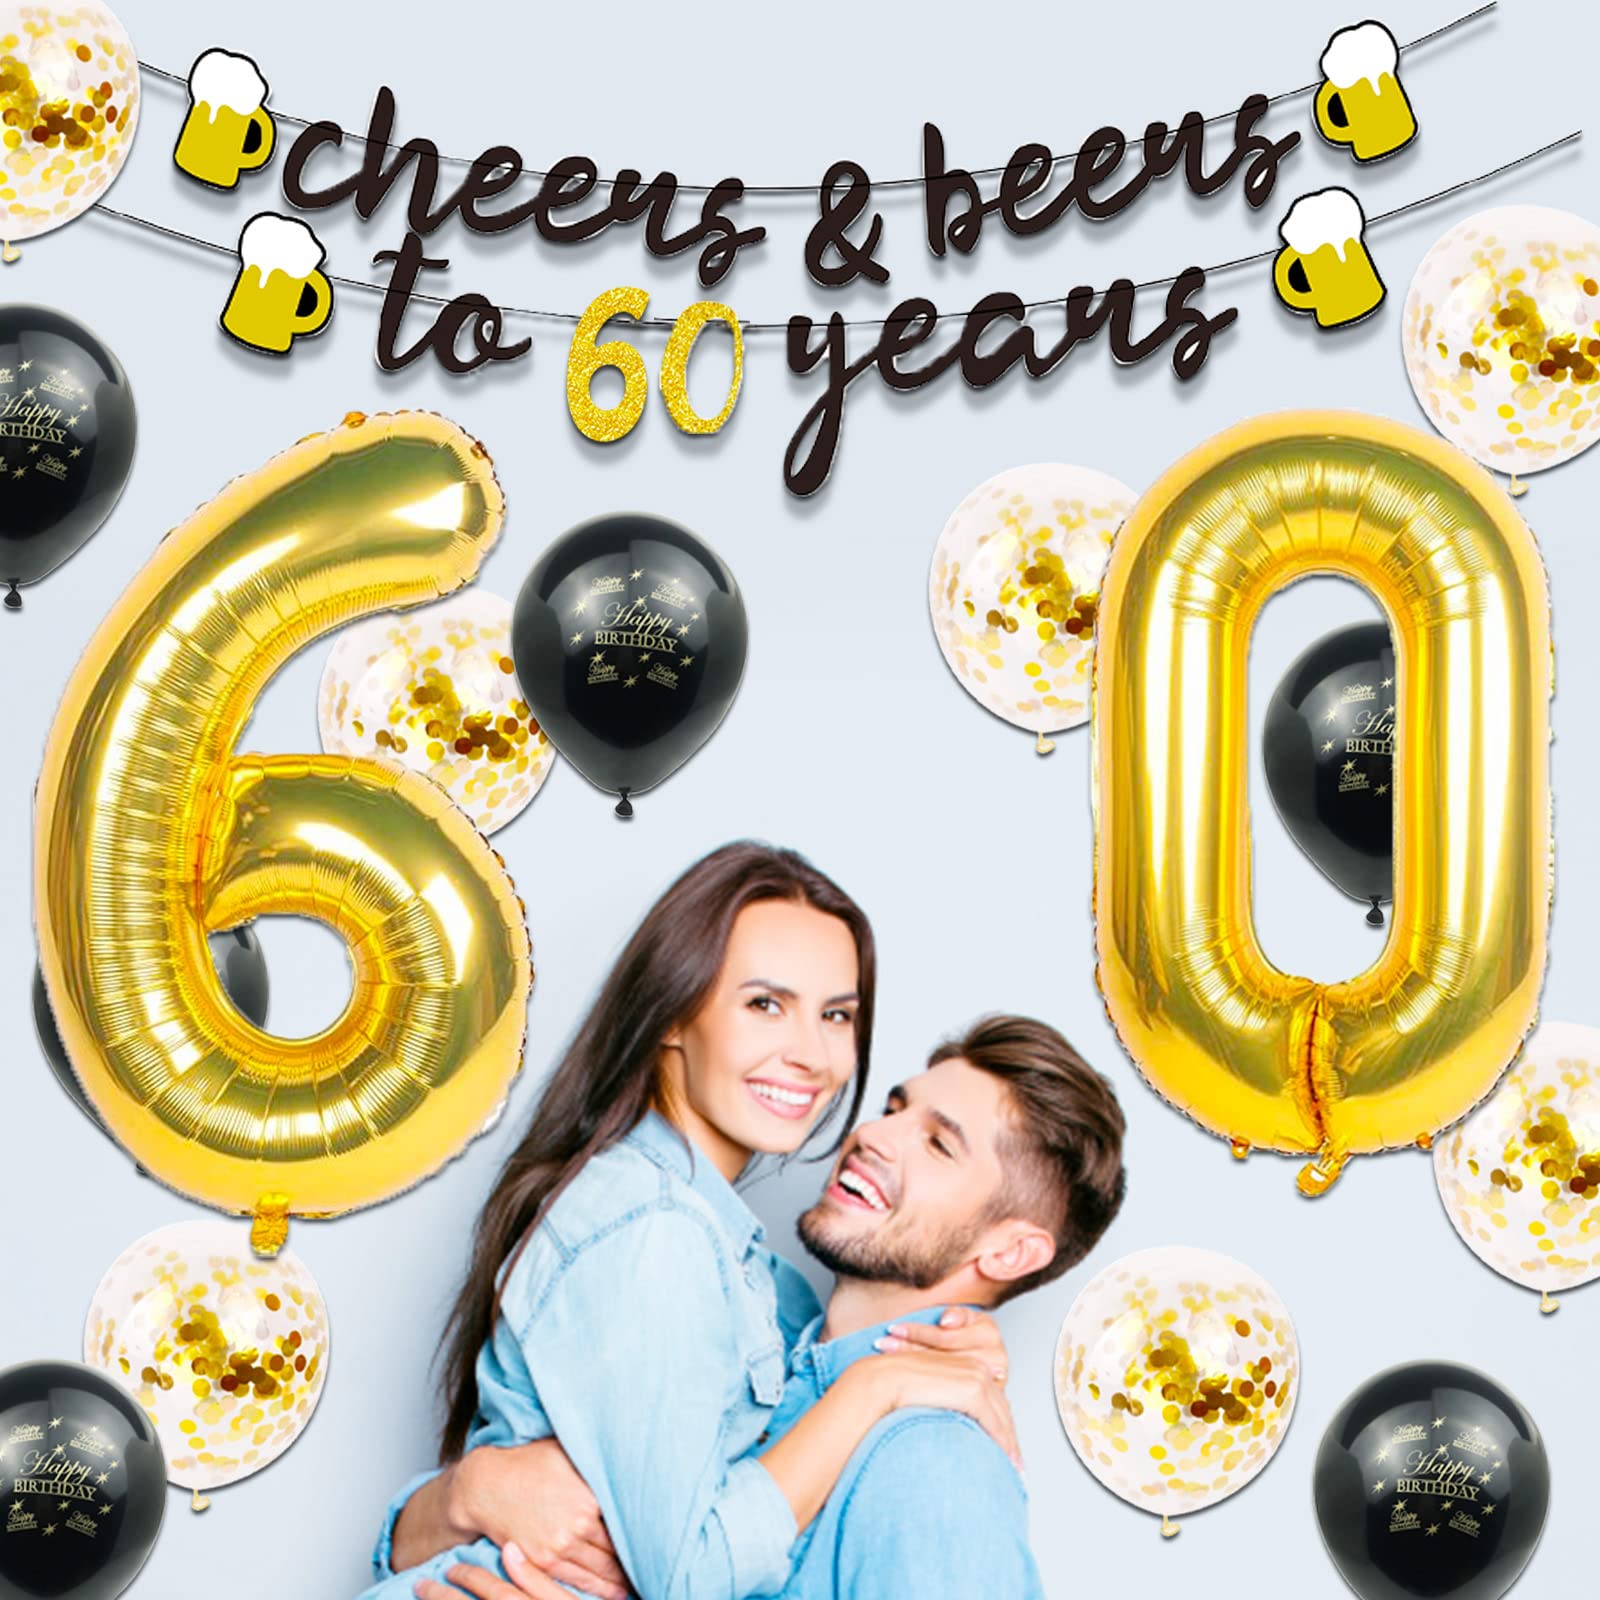 60th Birthday Decorations for Men, Happy 60th Birthday Decorations with 40 Inch Gold 60 Number Balloons, Birthday Banner, Latex Balloon, Fringe Curtains and Foil Balloons